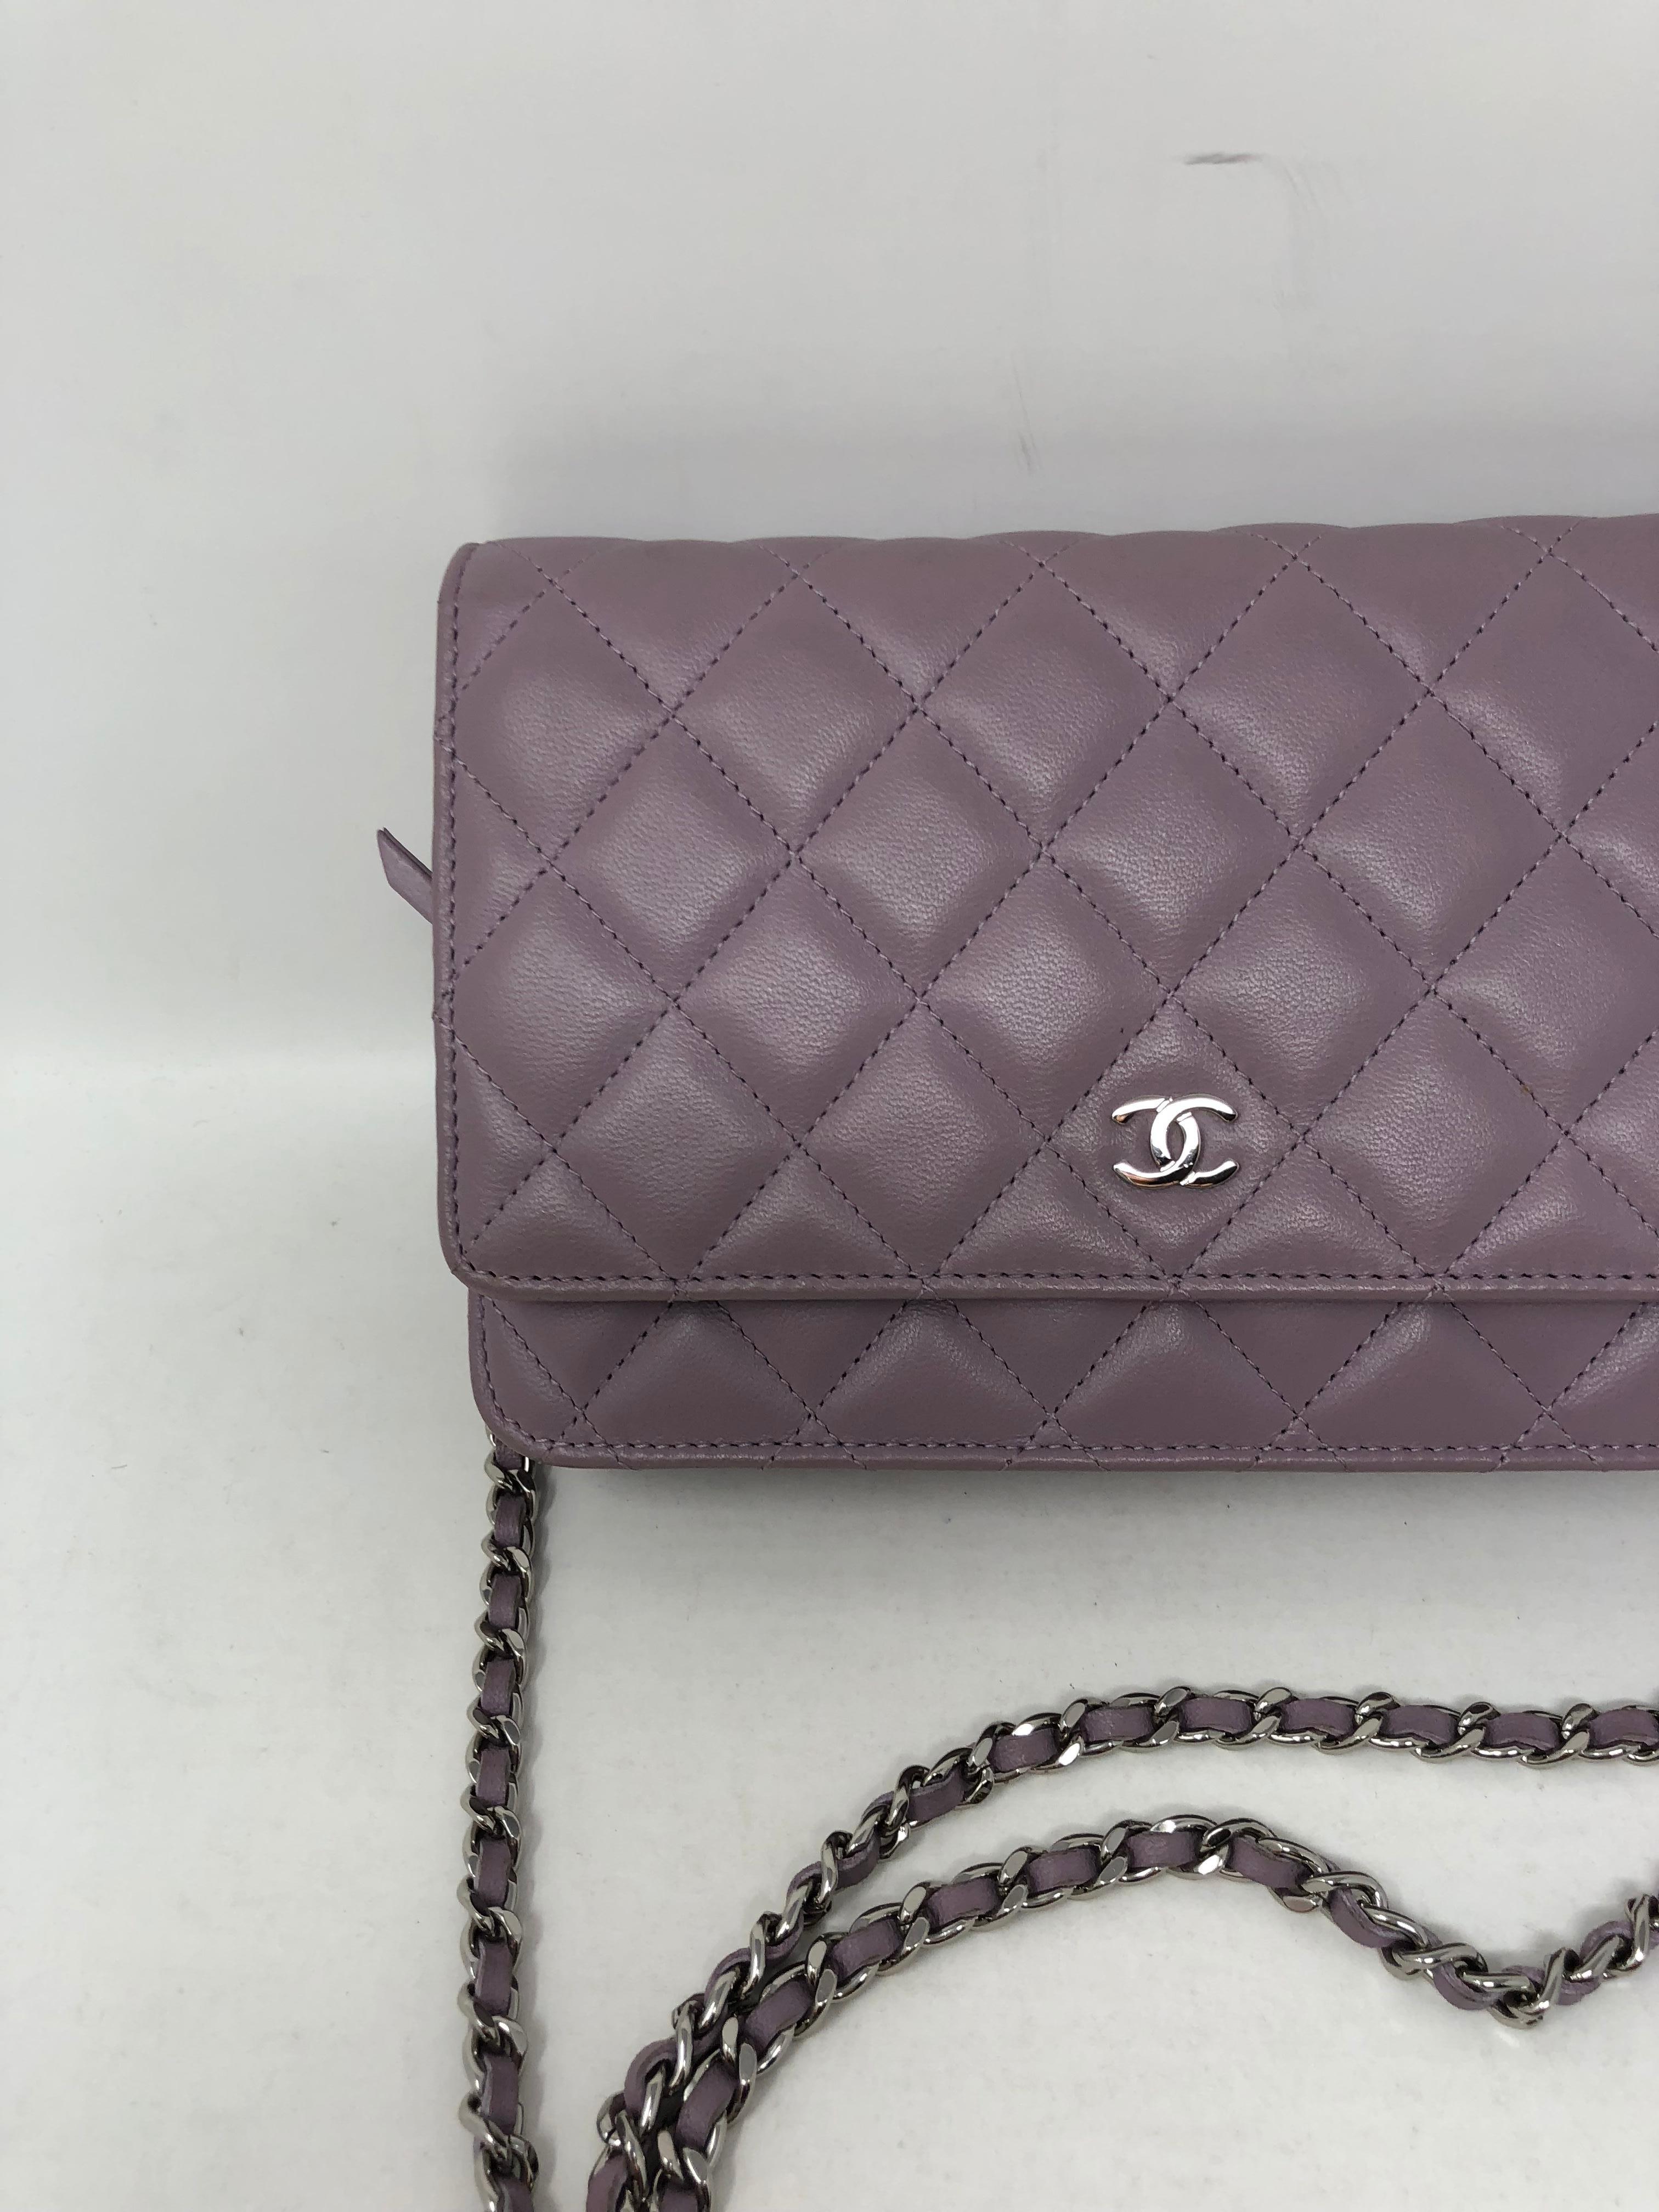 Chanel Lavendar Wallet on a Chain. Silver hardware. Good condition. From Series 17, comes with dustbag, authenticity card, booklet. Guaranteed authentic. 